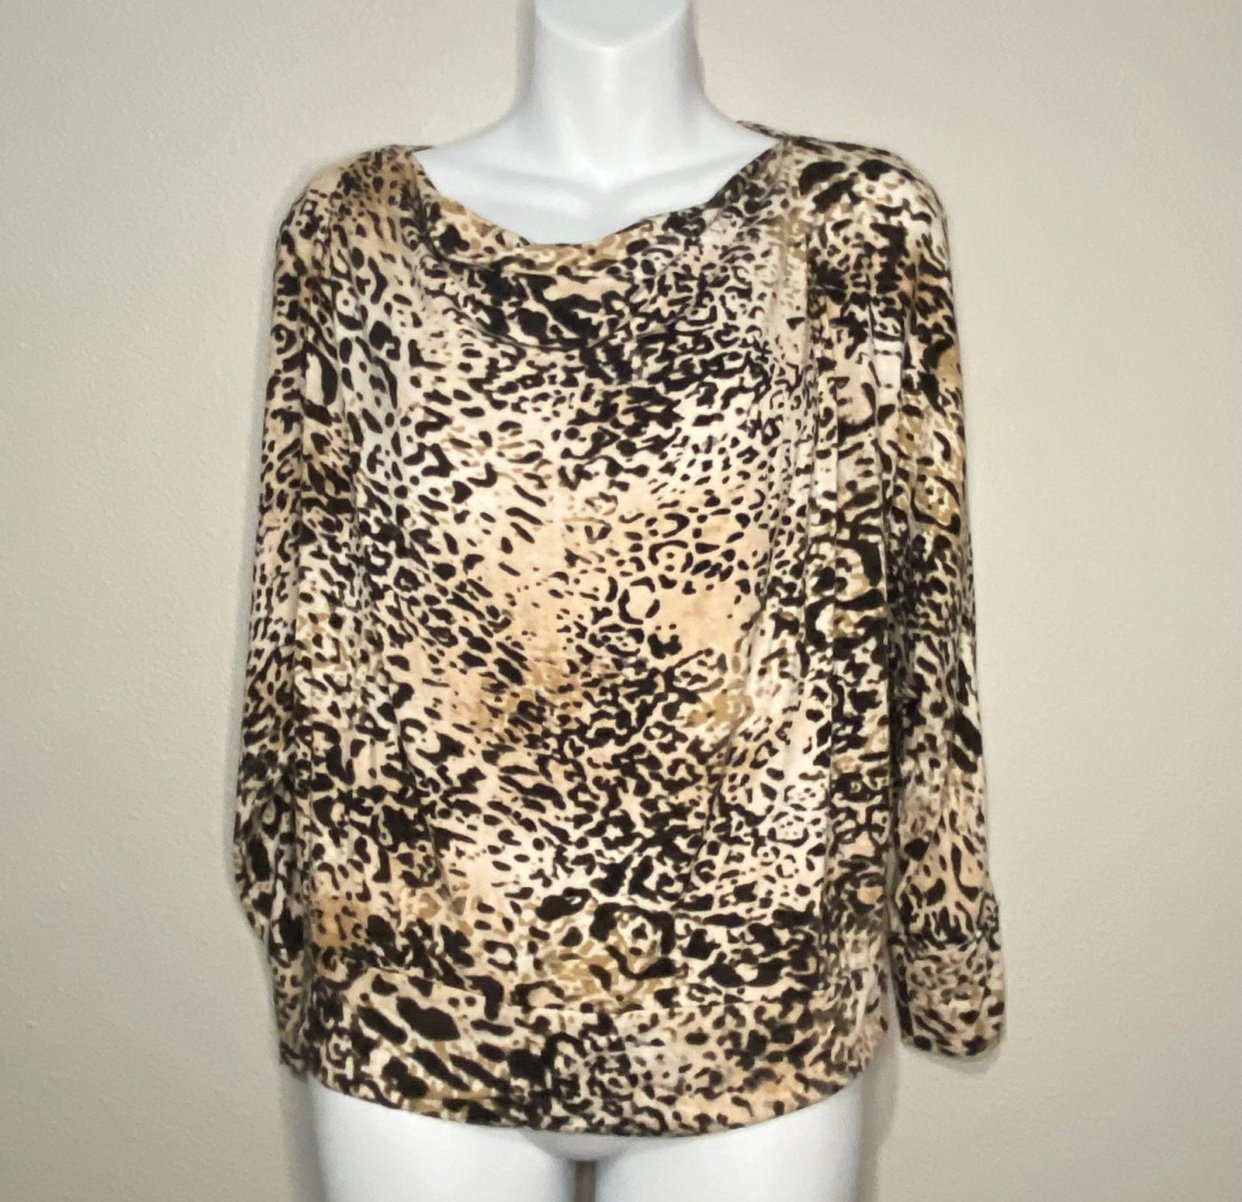 Wholesale price Investments Cheetah Print Cowl Neck Top